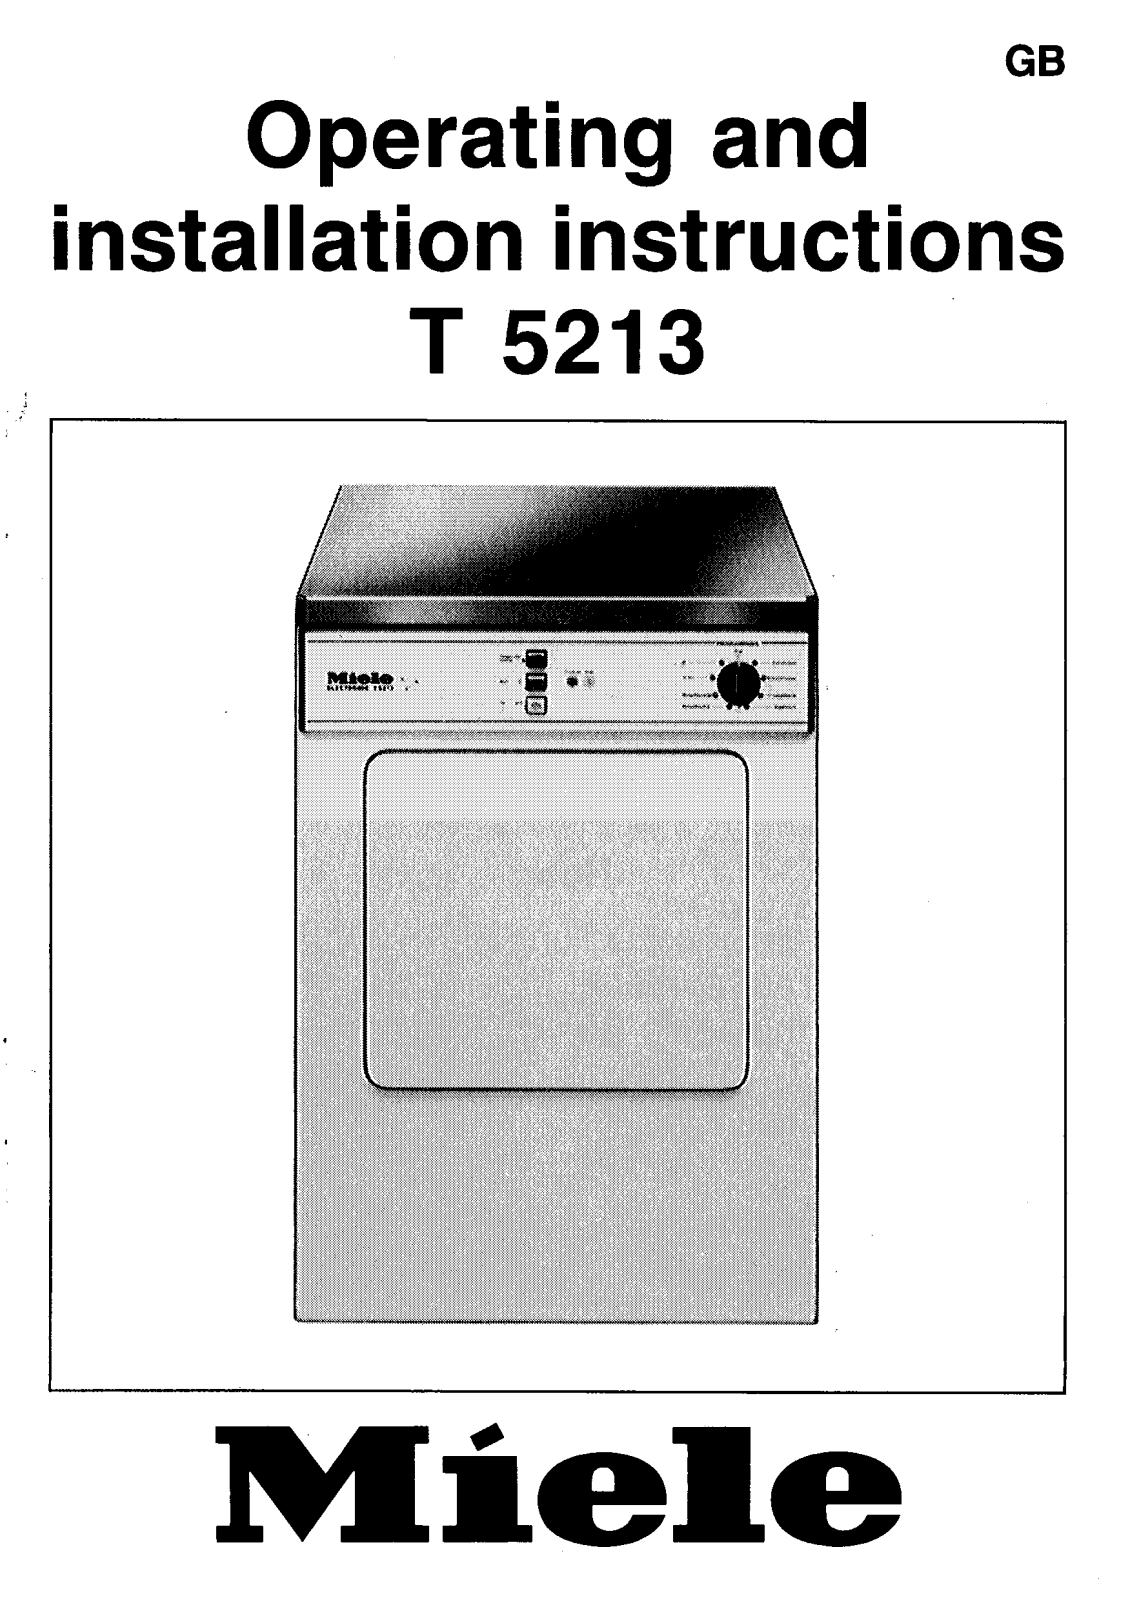 Miele T 5213 Operating instructions